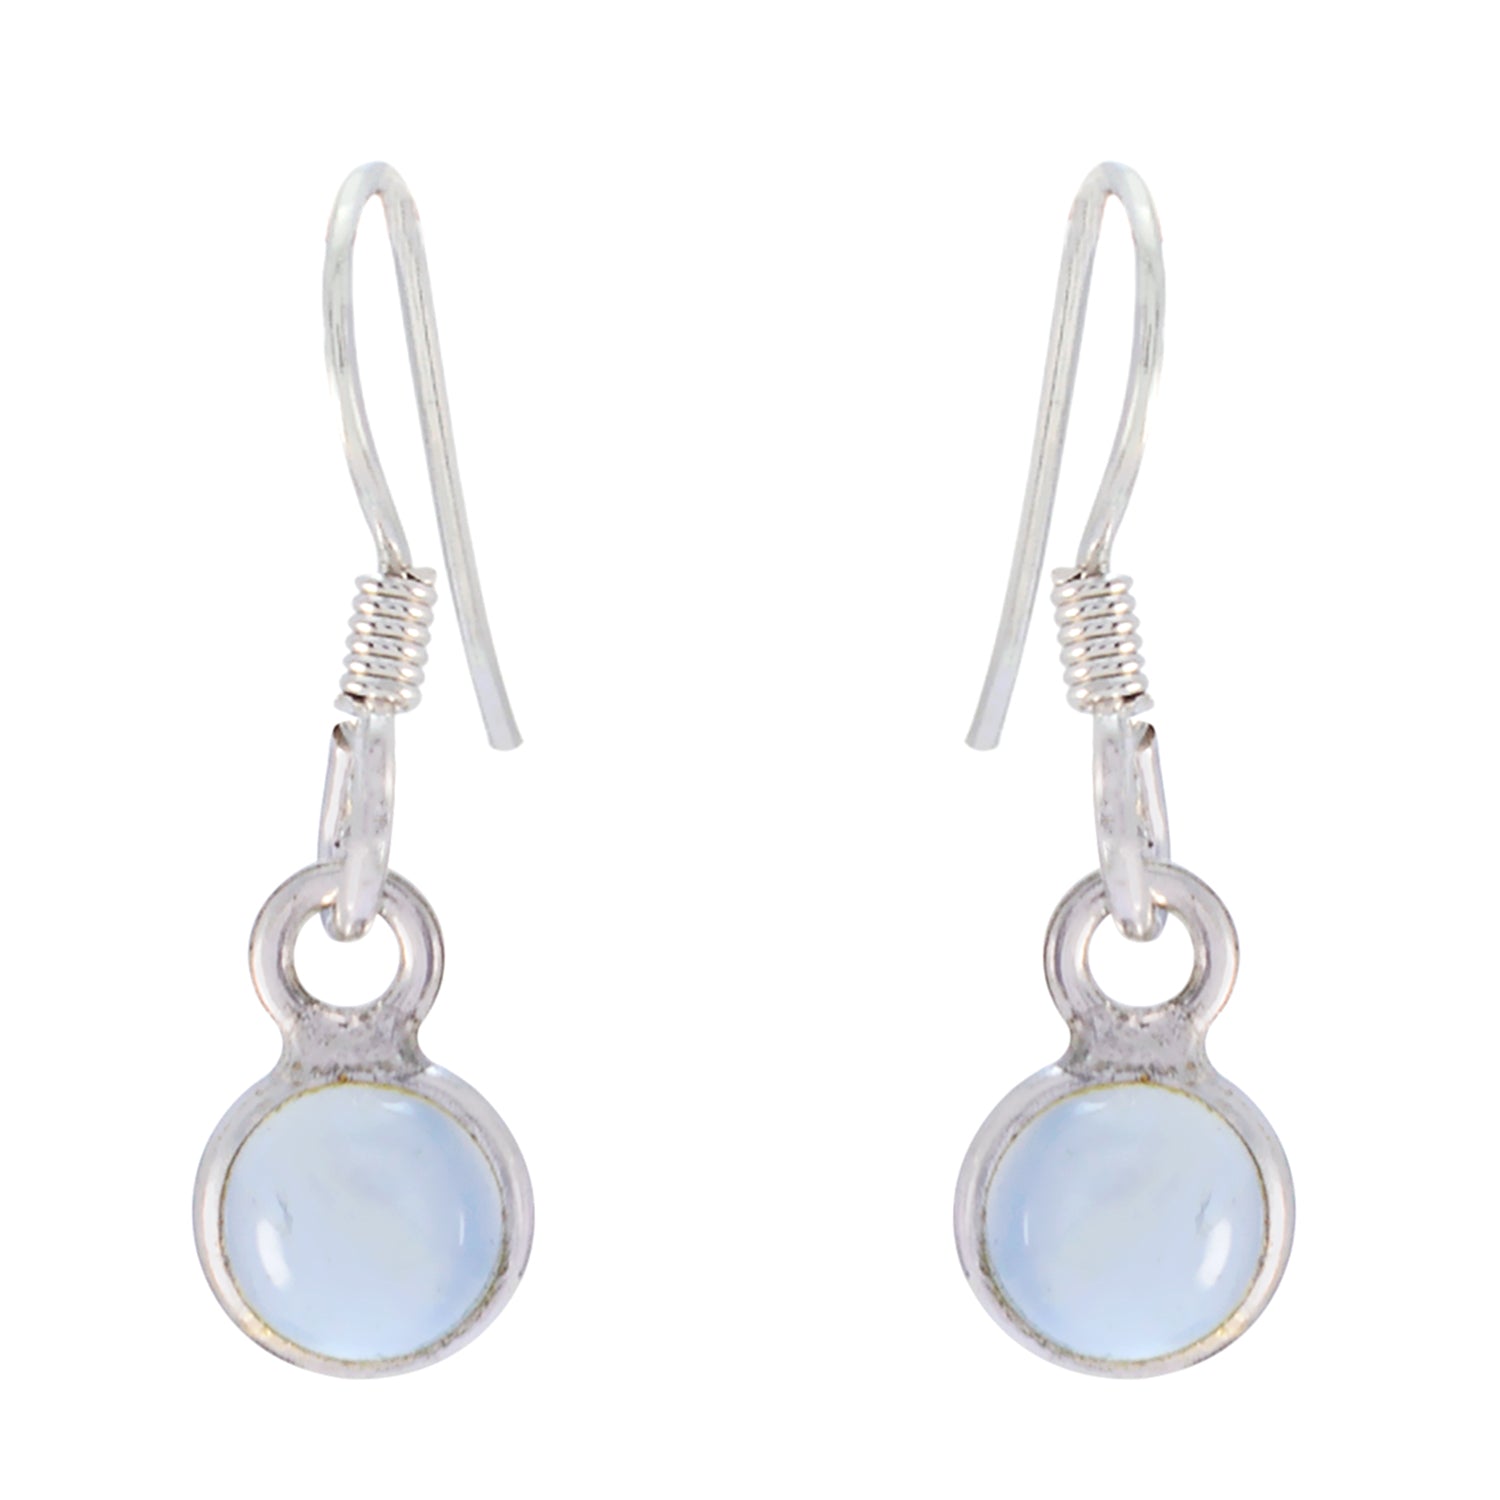 Riyo Nice Gemstone round Cabochon Blue Chalcedony Silver Earrings gift for mothers day